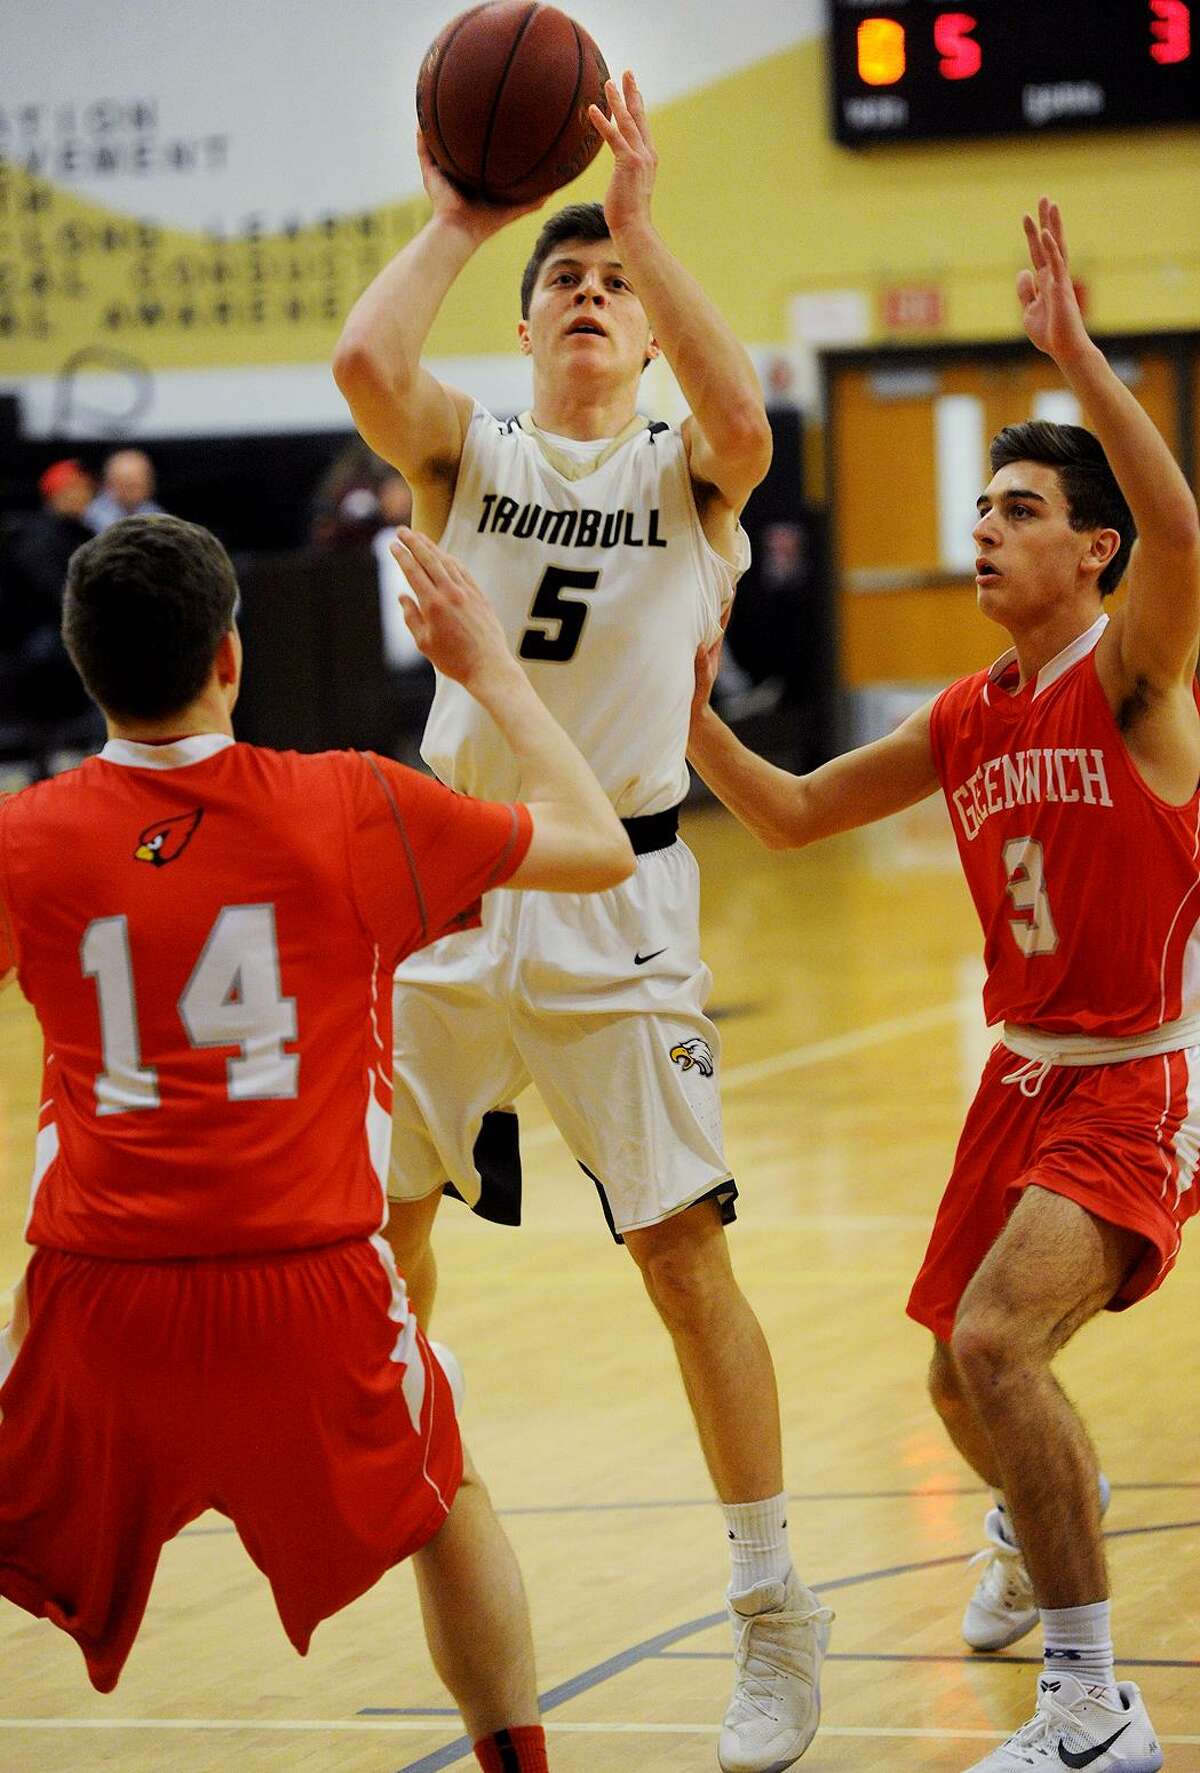 Trumbull’s Daniel Ruchalski takes a jump shot between Greenwich defenders Robert Clark, left, and Charlie Zeeve during his team's victory in the opening round of the Class LL tournament Monday at Trumbull High School.